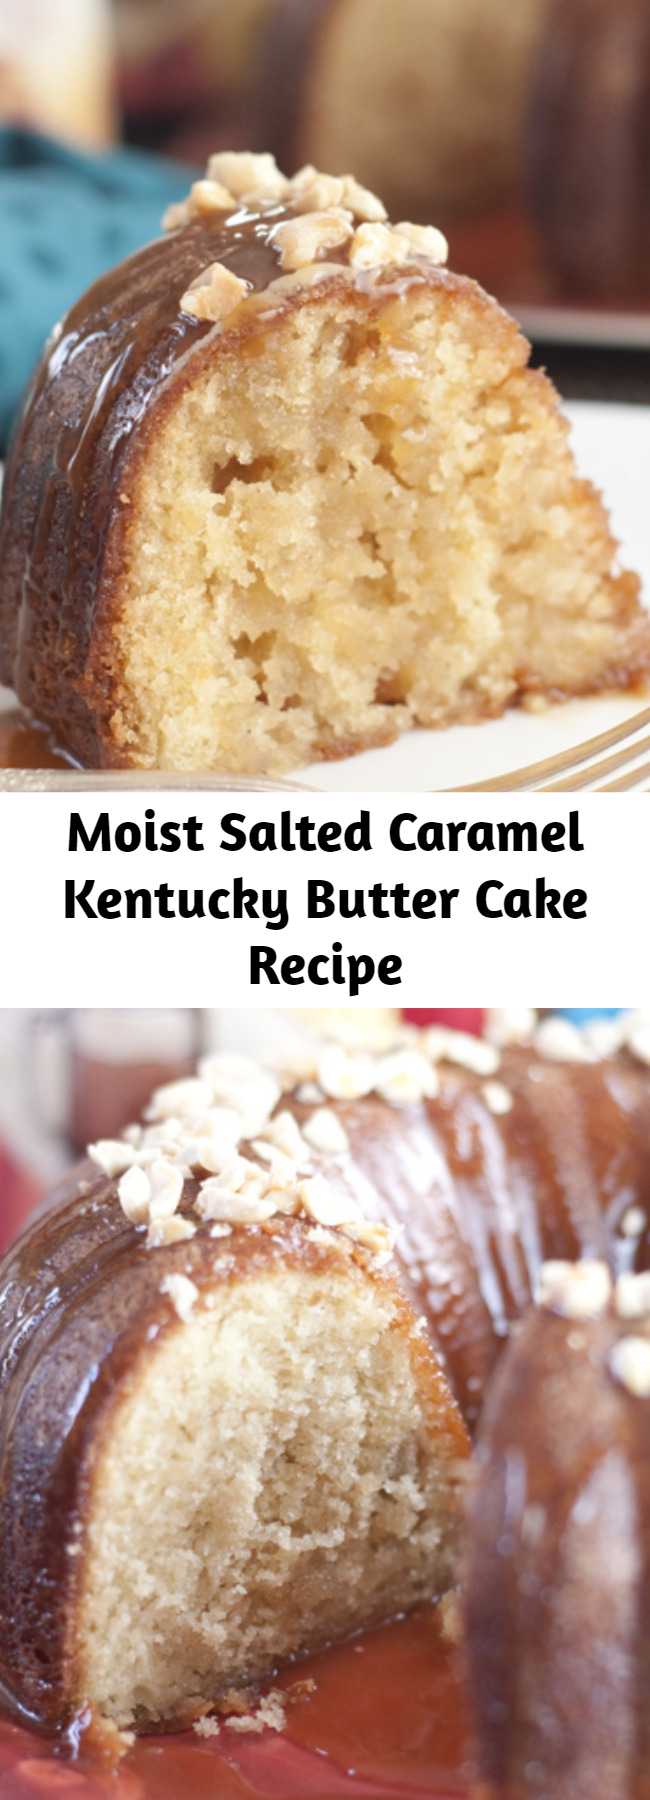 Moist Salted Caramel Kentucky Butter Cake Recipe - Salted Caramel Kentucky Butter Cake is a homemade moist and buttery cake recipe with a caramel butter sauce that is rich, delicious, and soaks into the cake!